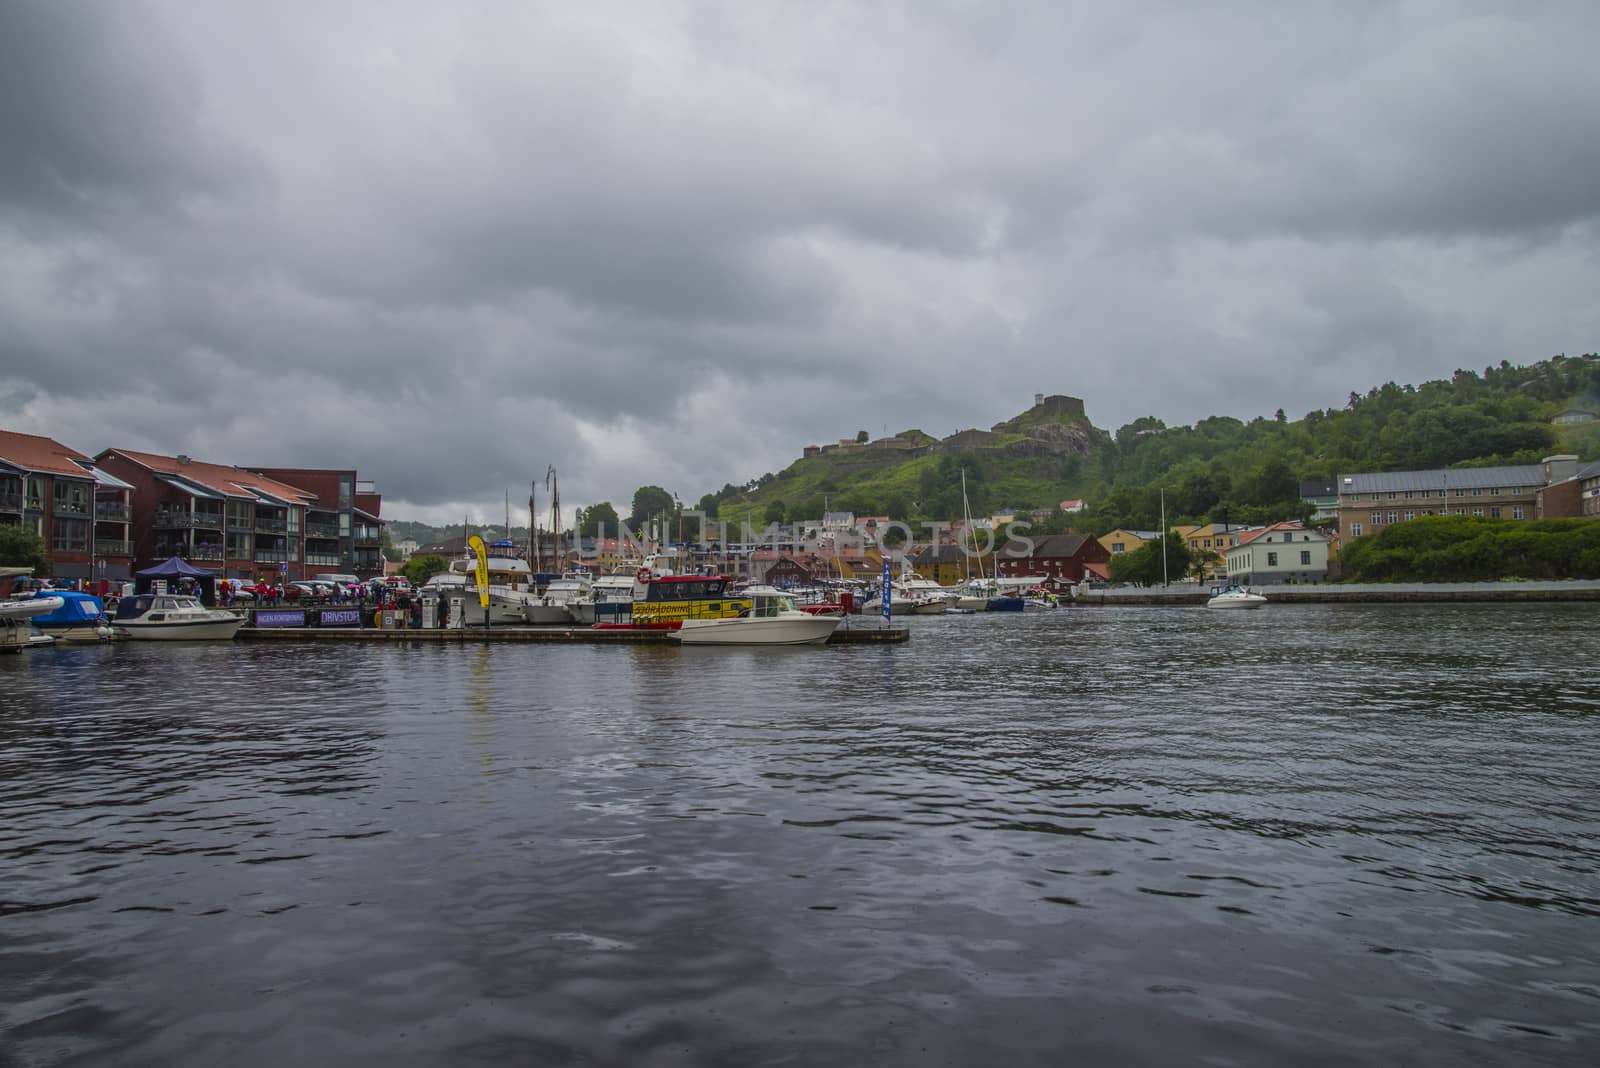 Exhibition of boats in the port of Halden, photo 14 by steirus